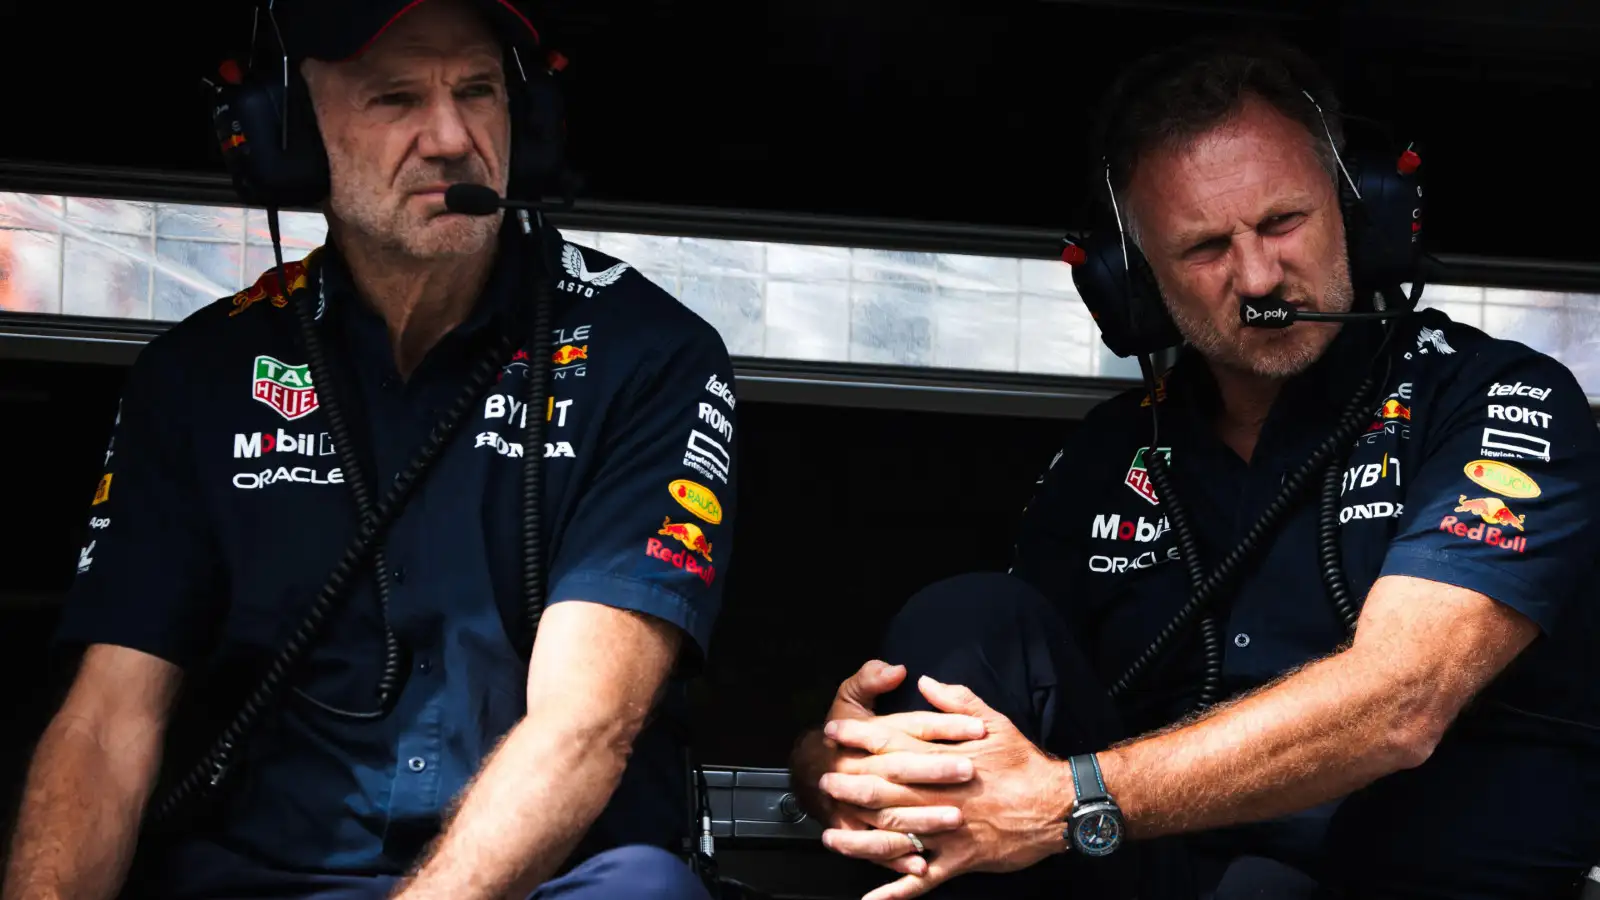 Adrian Newey and Christian Horner pictured on the pitwall at the Dutch Grand Prix.